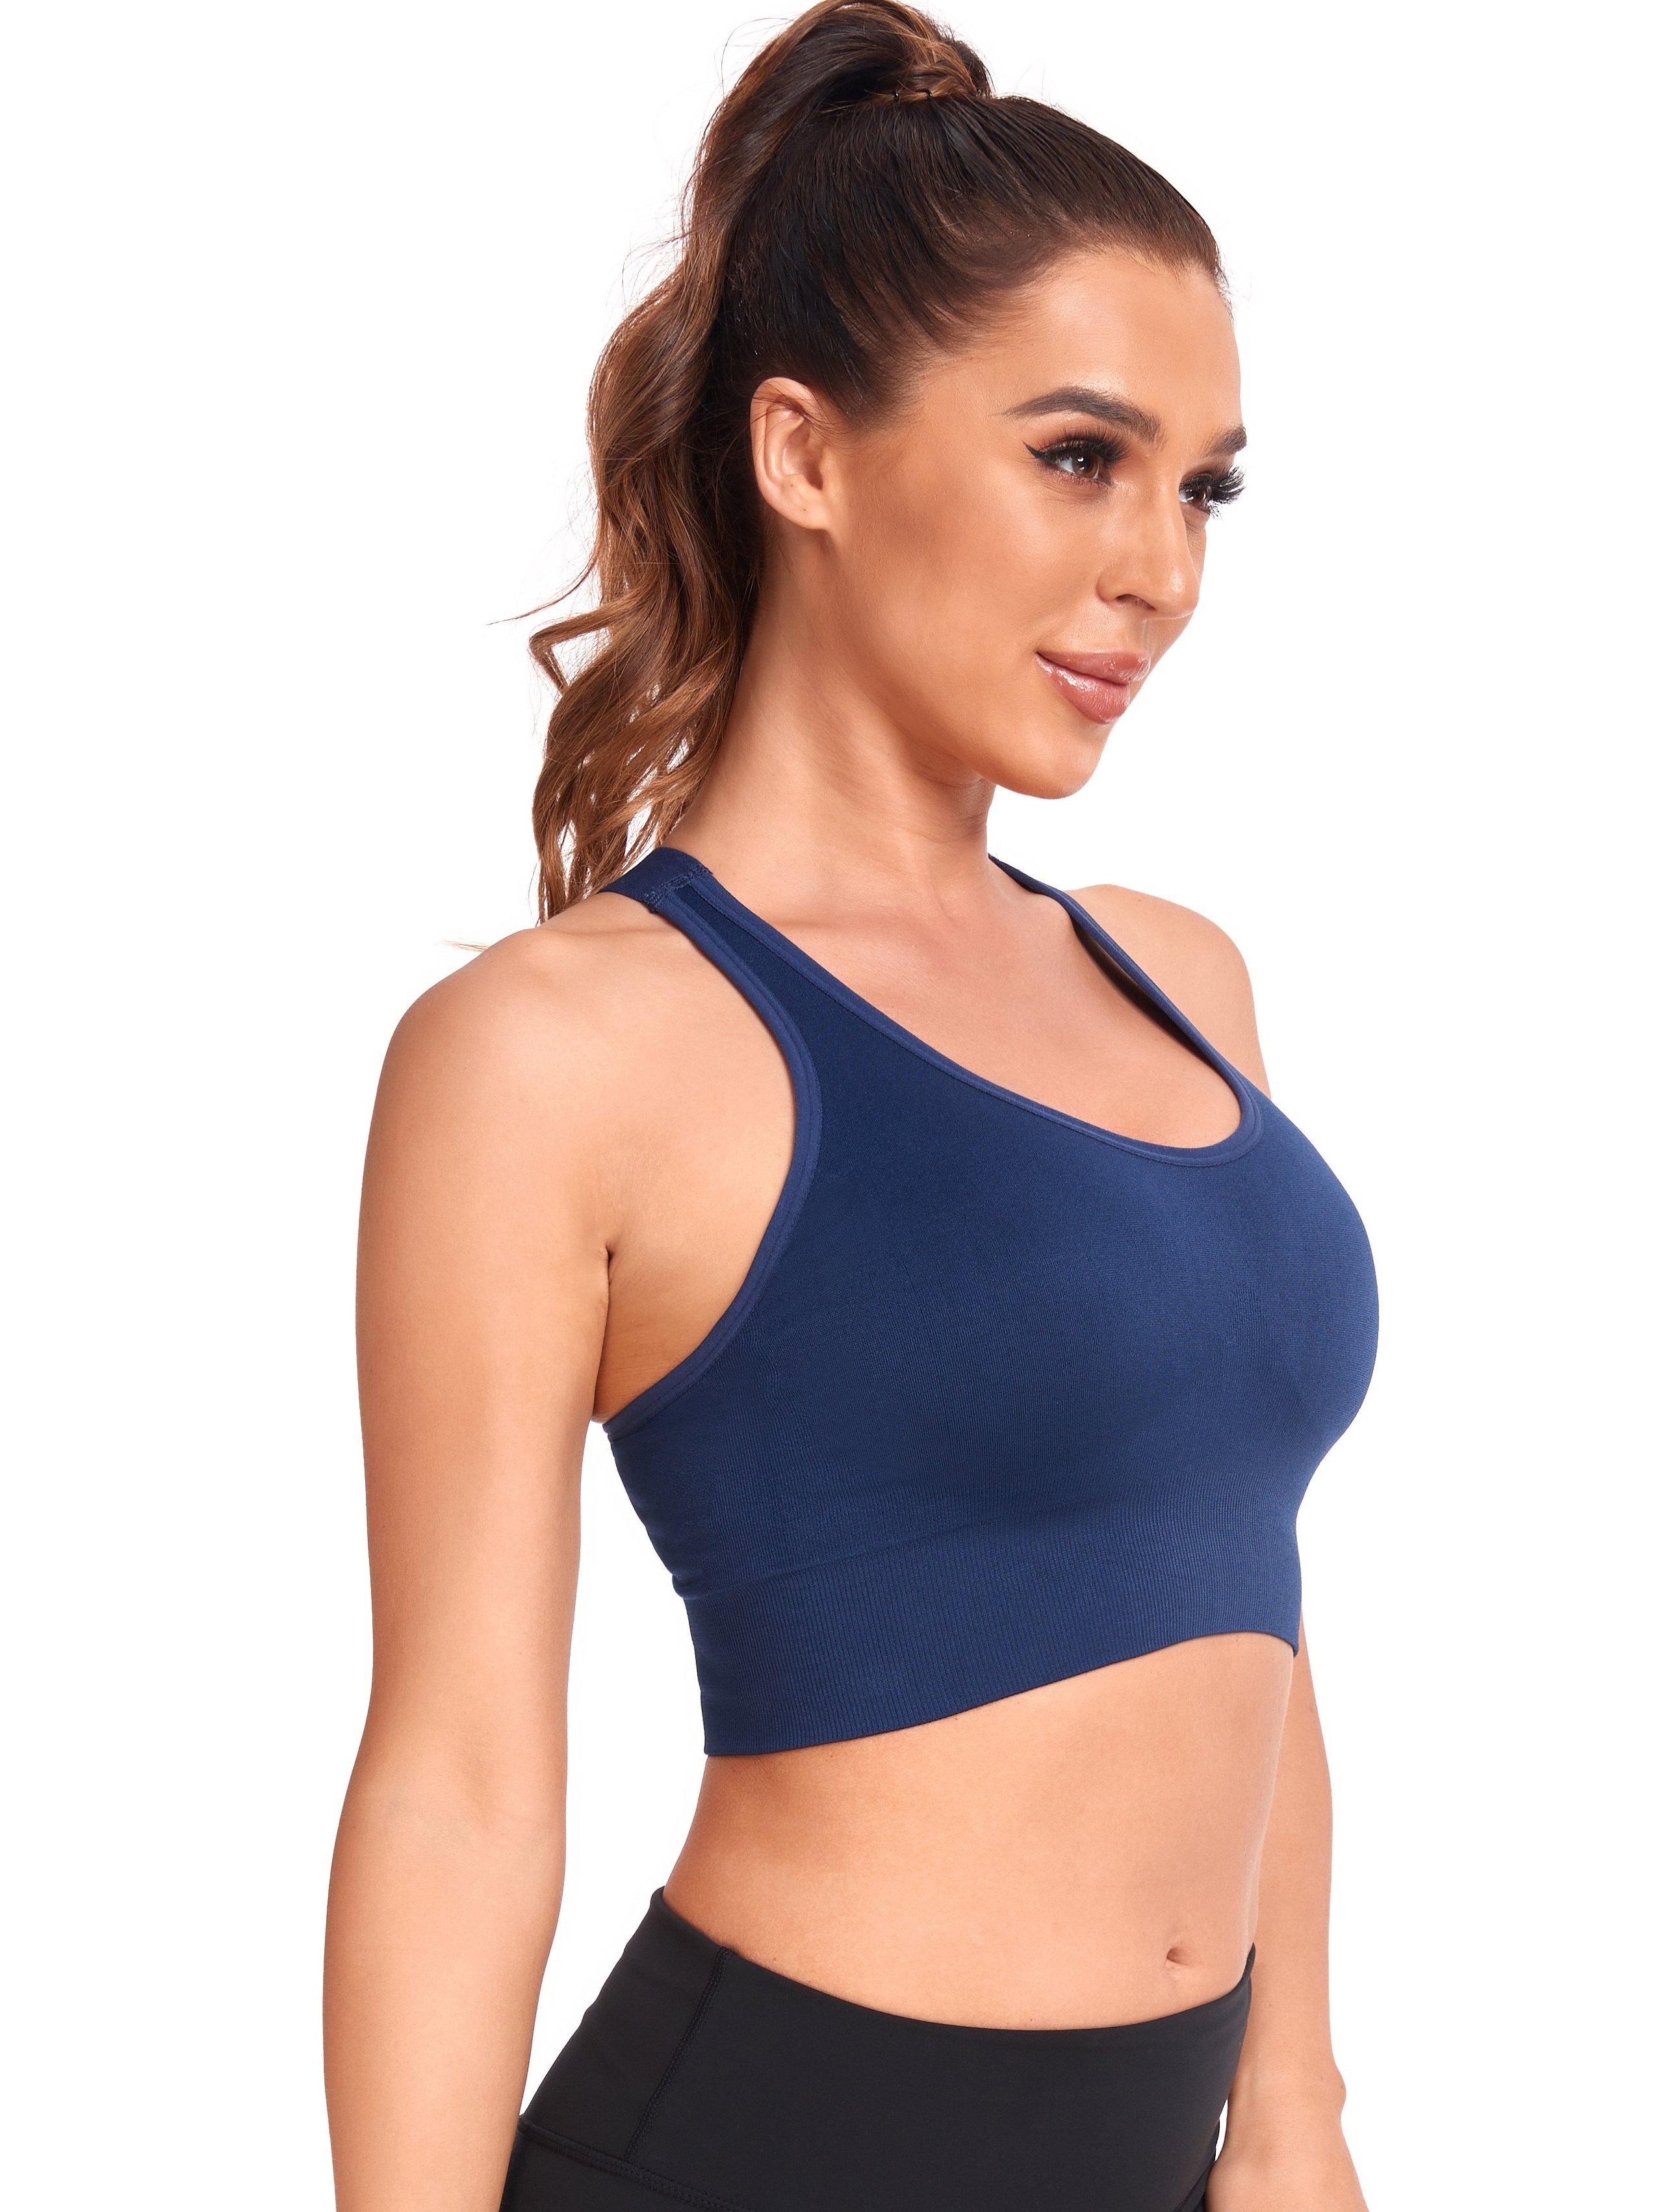 Criss-Cross Back Sports Bra for Women, Back Support Hook Closure Tank Top,  with Removable Cup, Running Yoga Workout (Color : Blue, Size : Small)